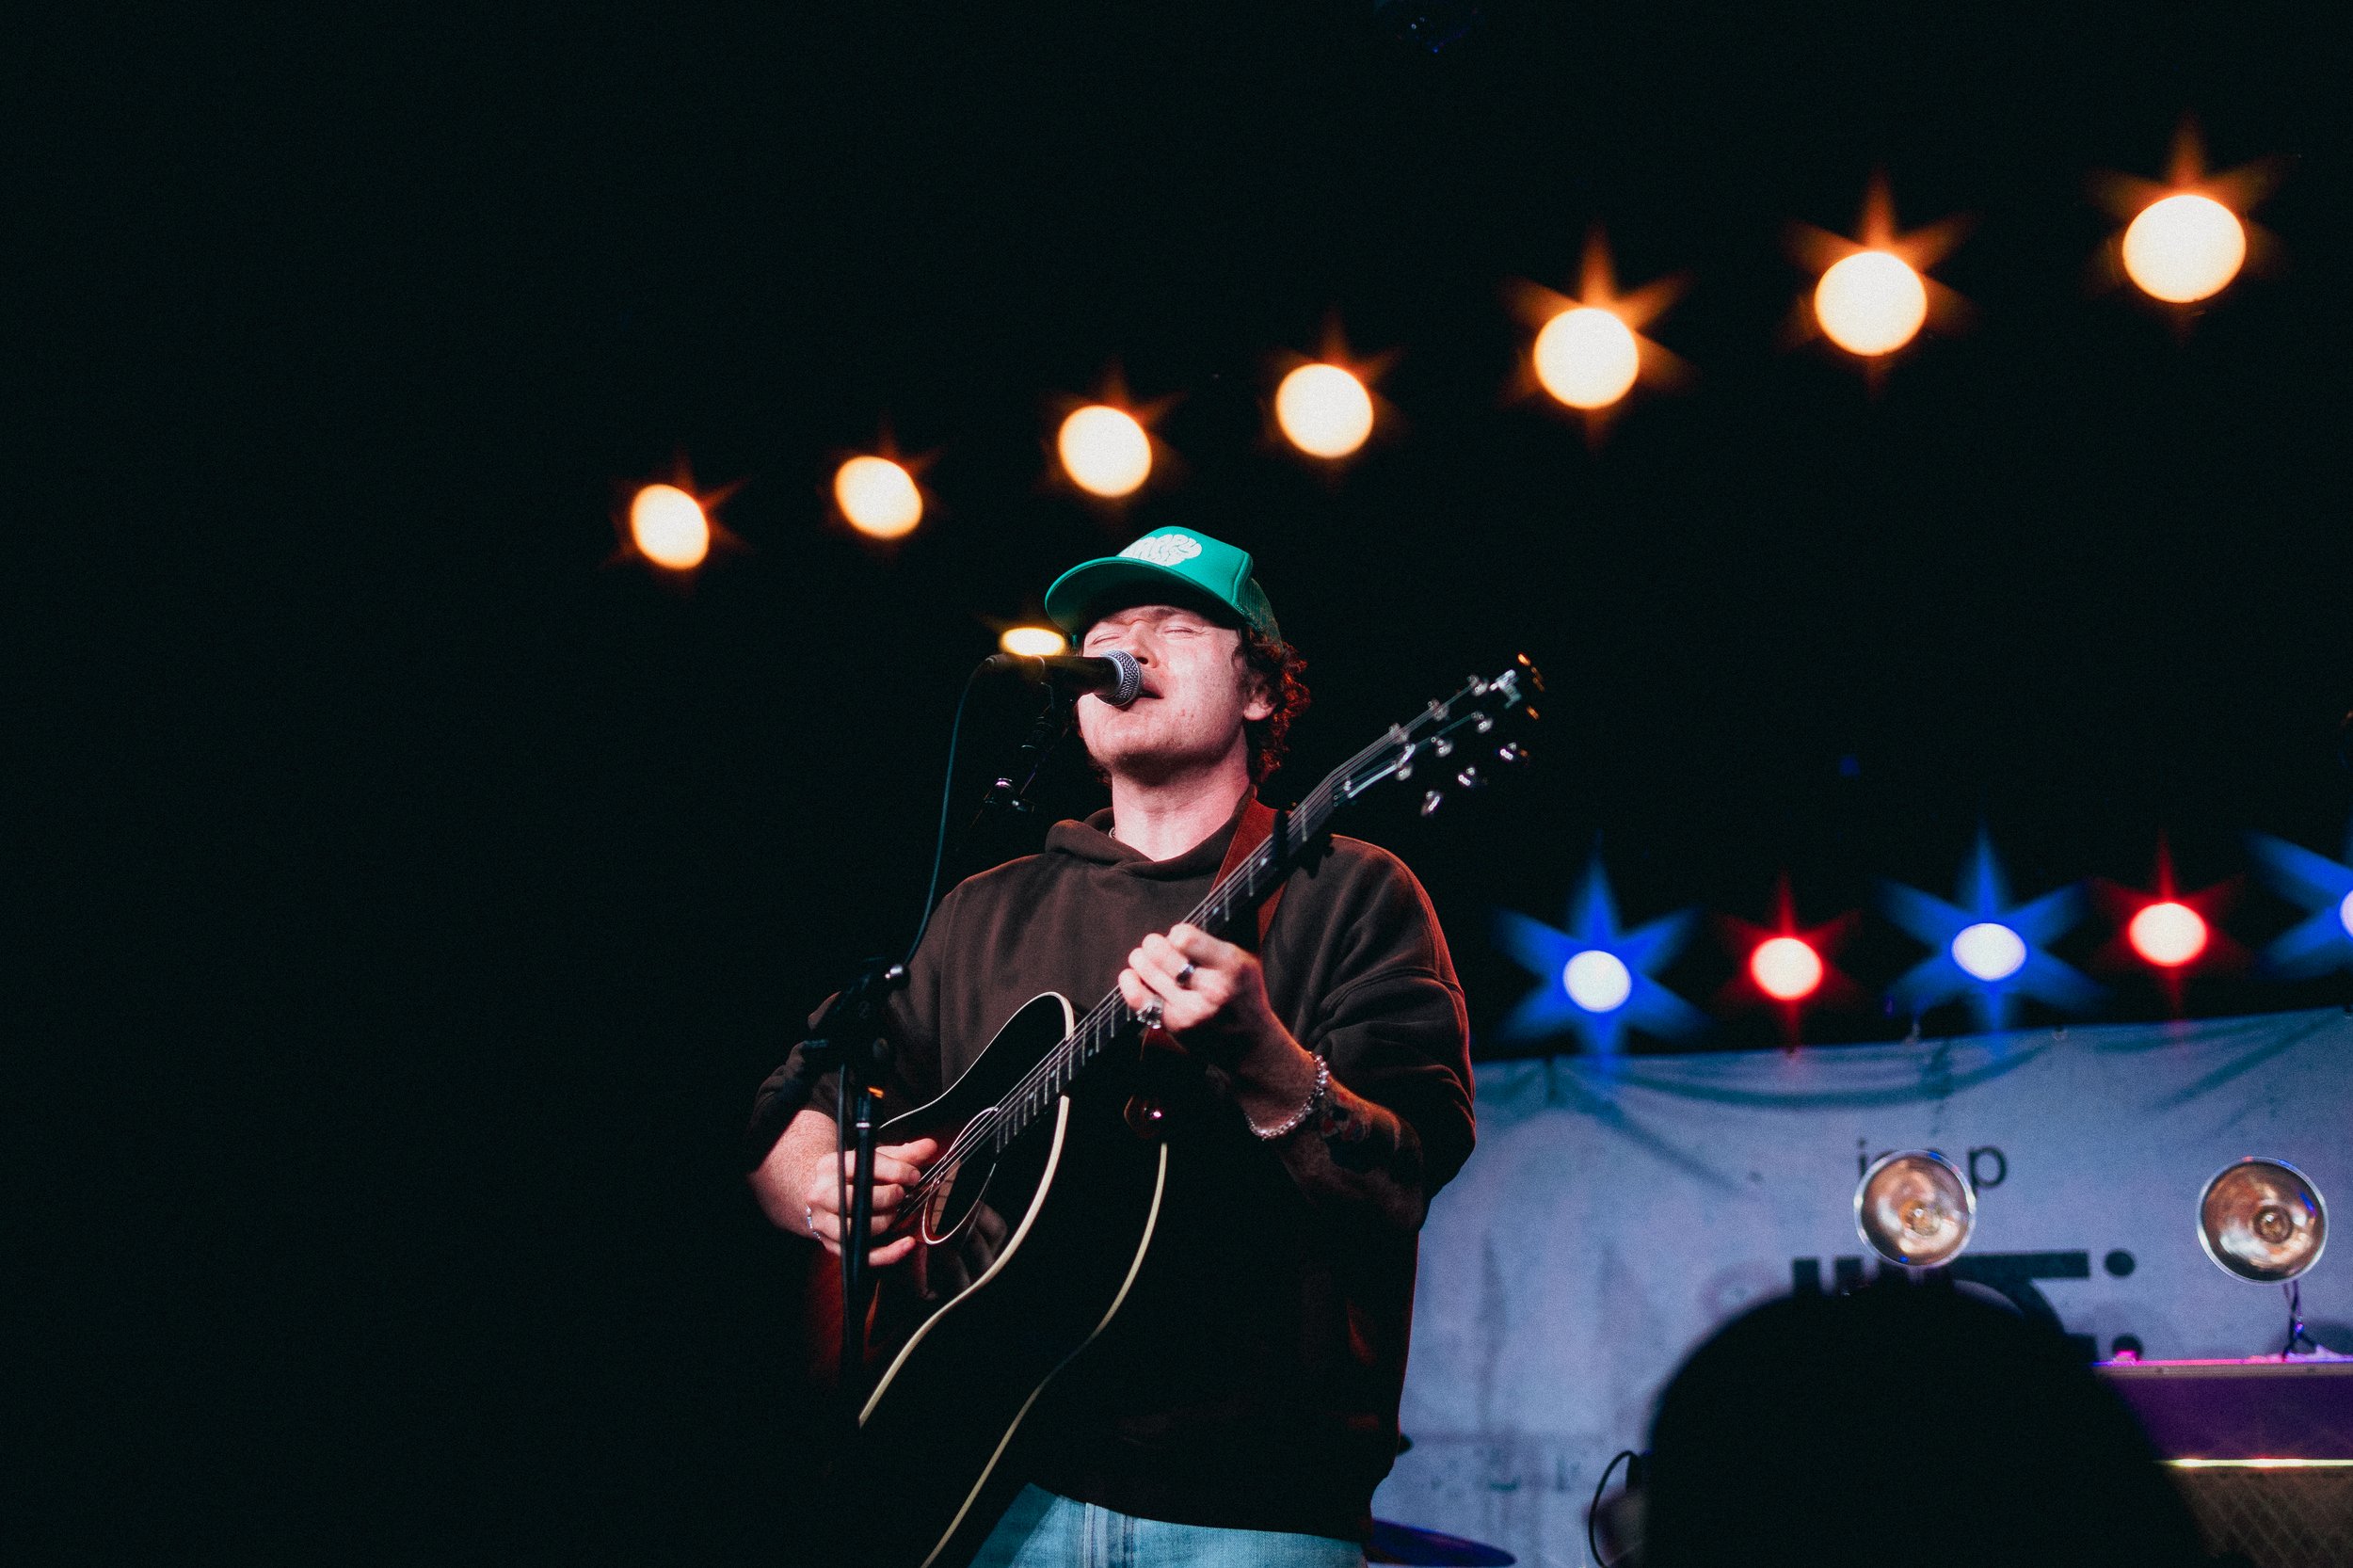  Nashville-based singer Zach Stein, stage name Steinza, soulfully sings an unreleased song.  